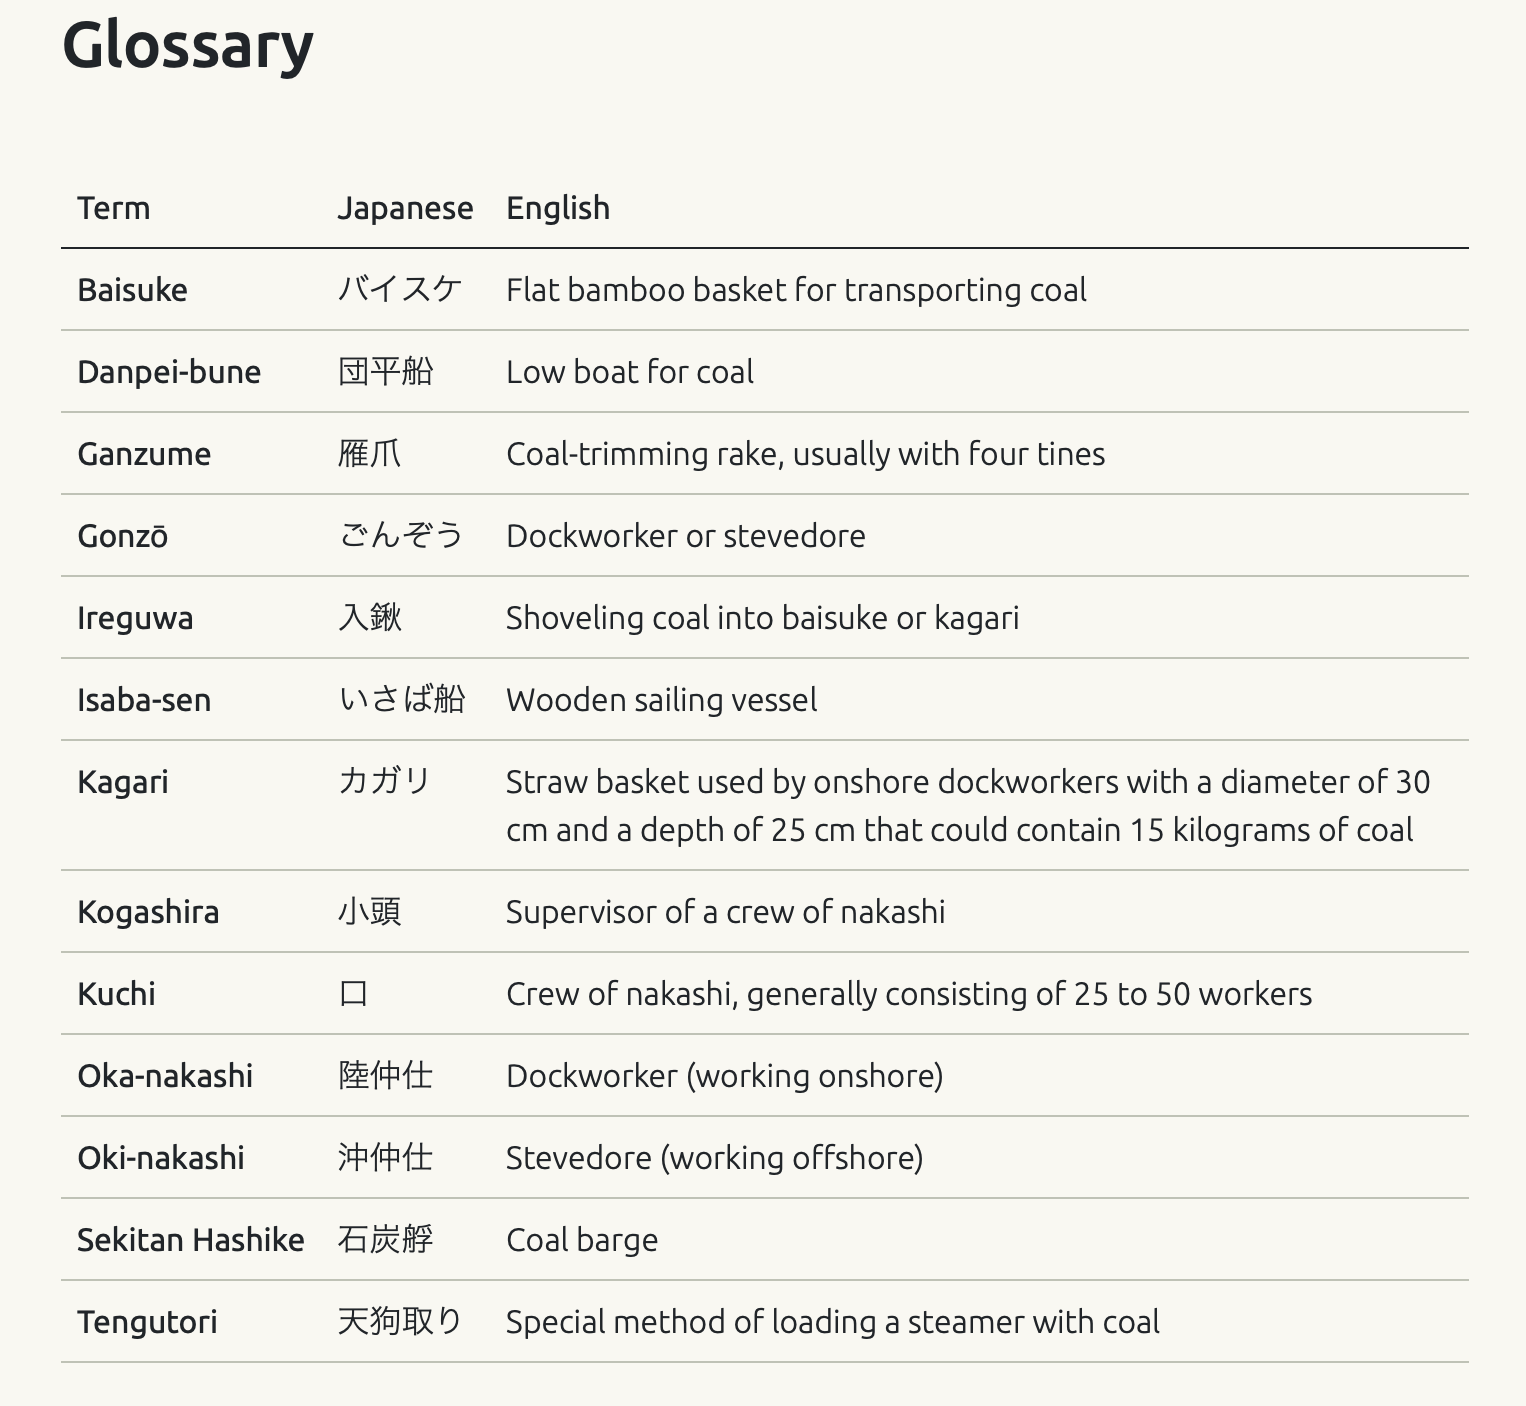 Glossary of Japanese coaling terms